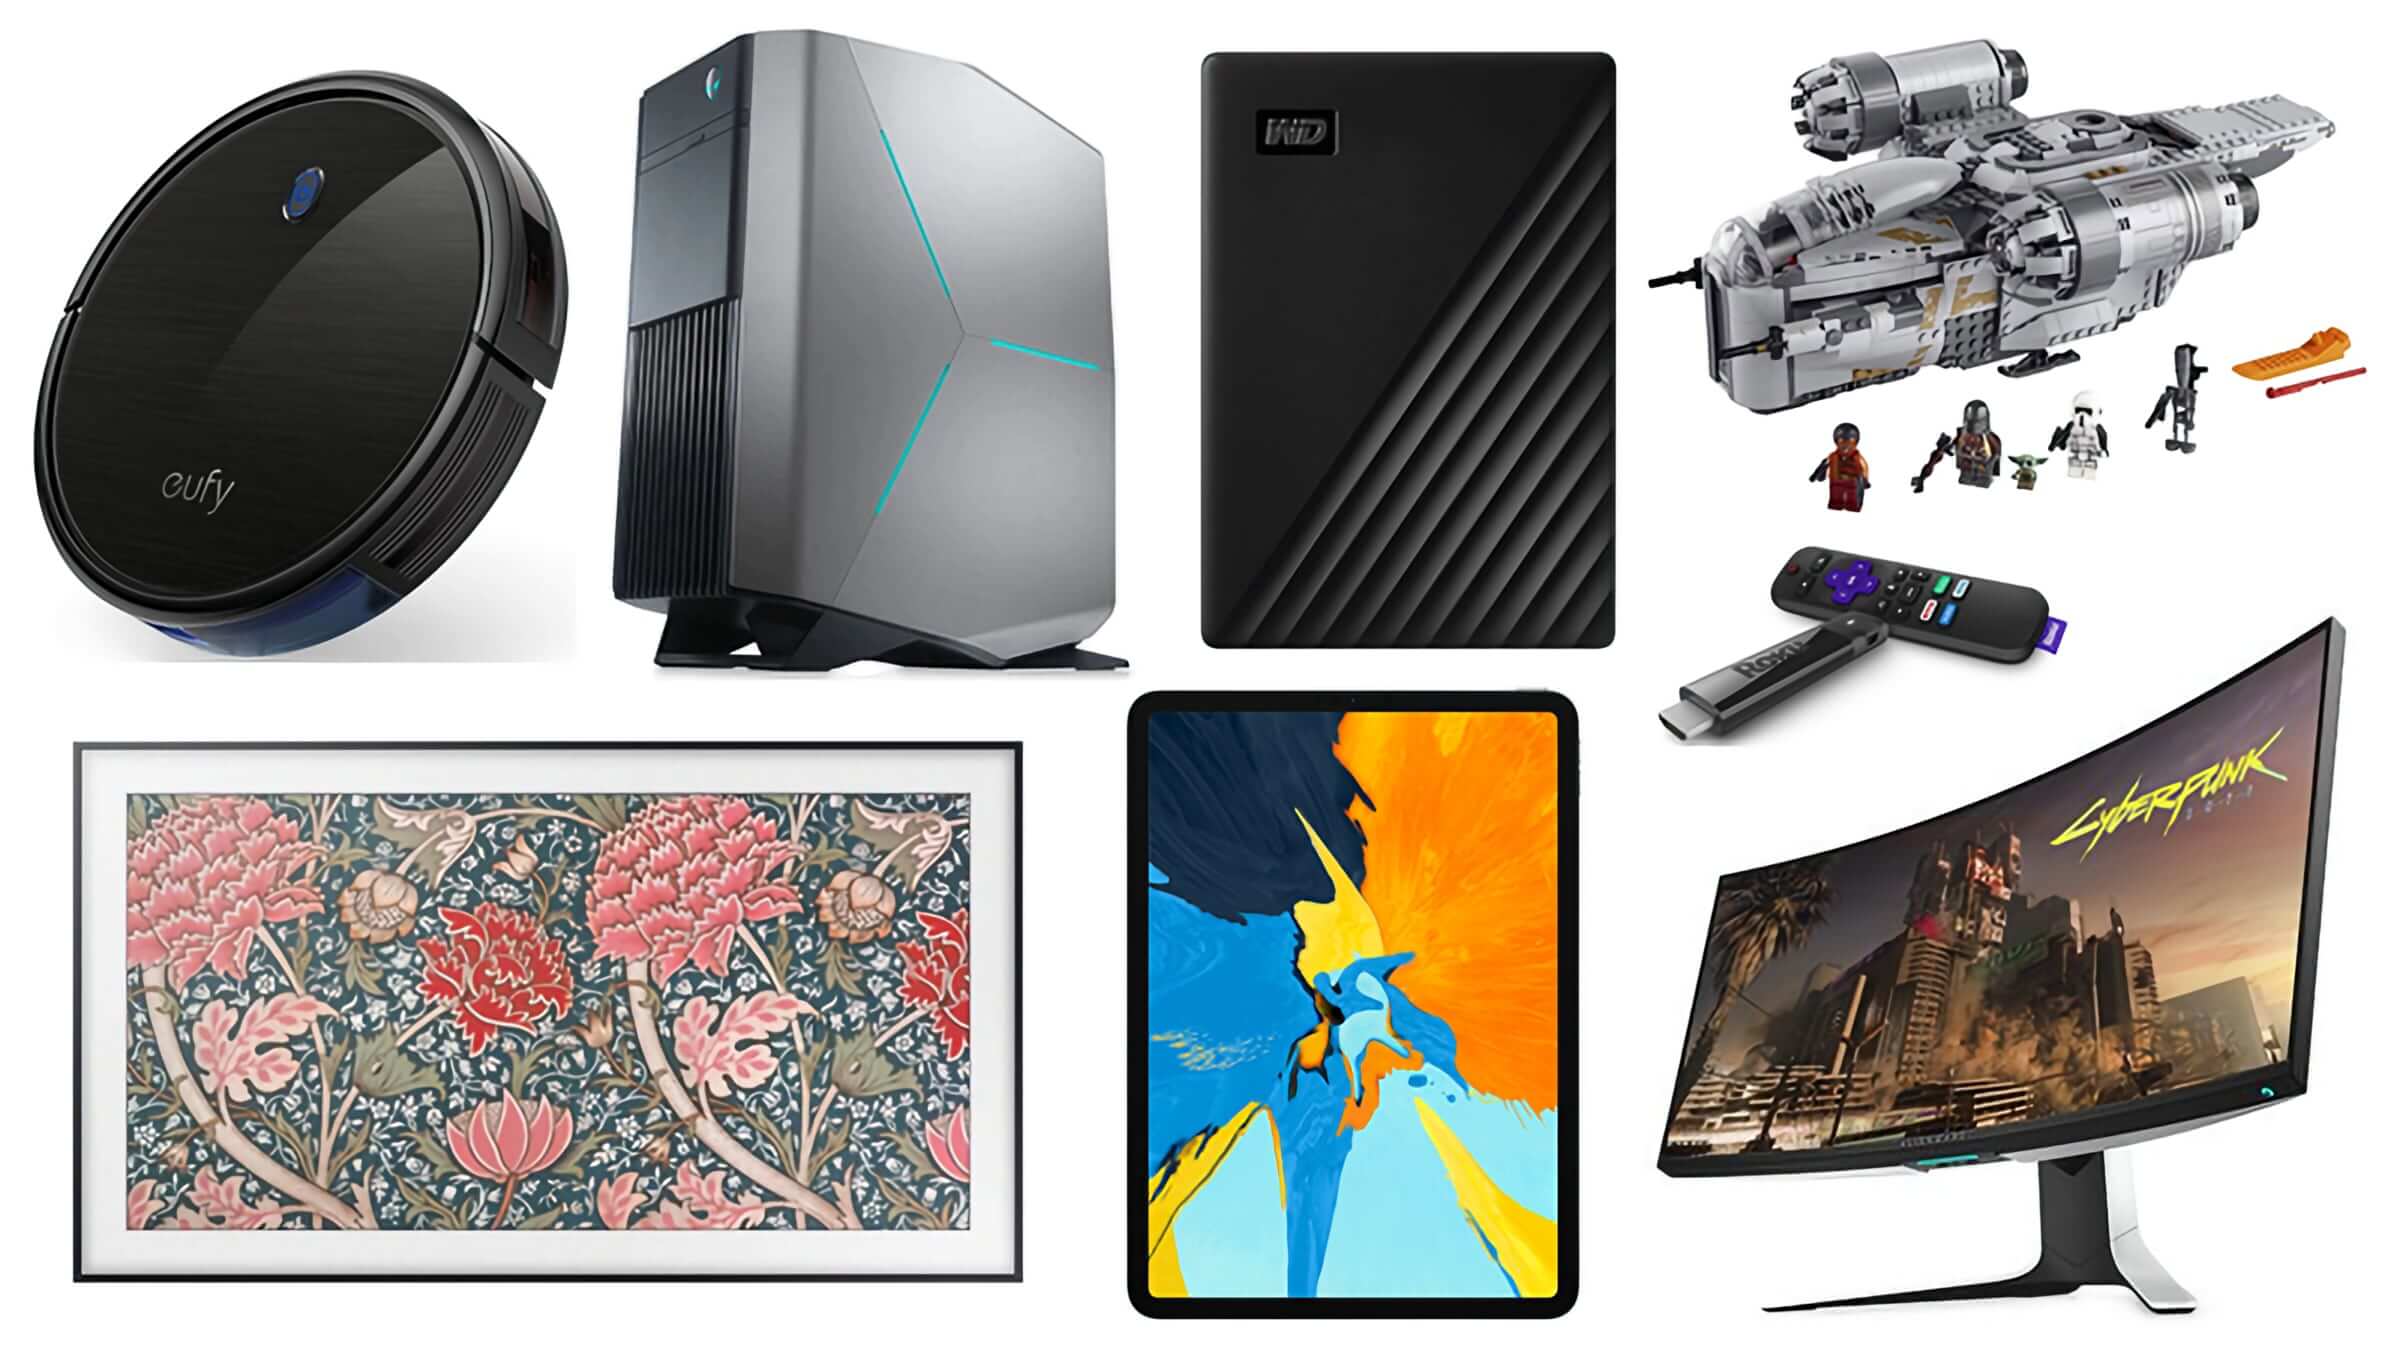 Get an extra 17% off Dell and Alienware PCs this weekend, and more tech  deals | TechSpot